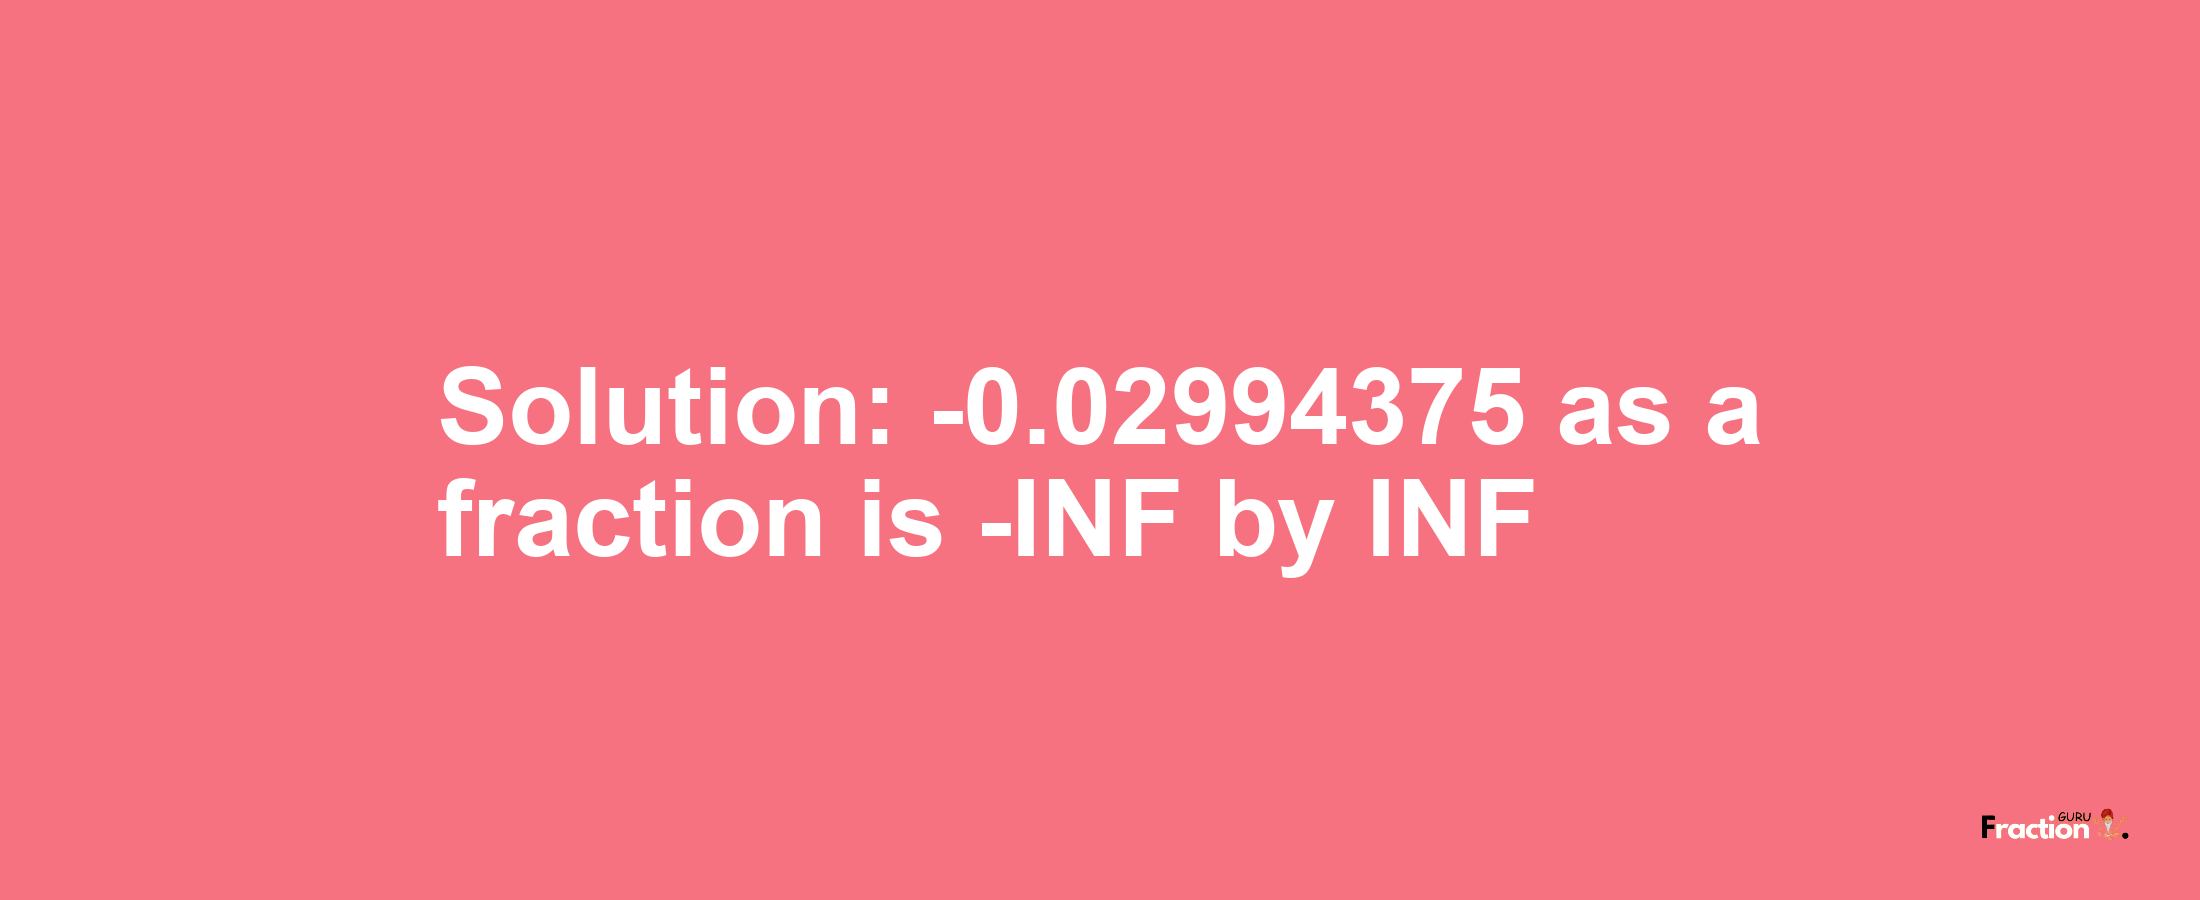 Solution:-0.02994375 as a fraction is -INF/INF